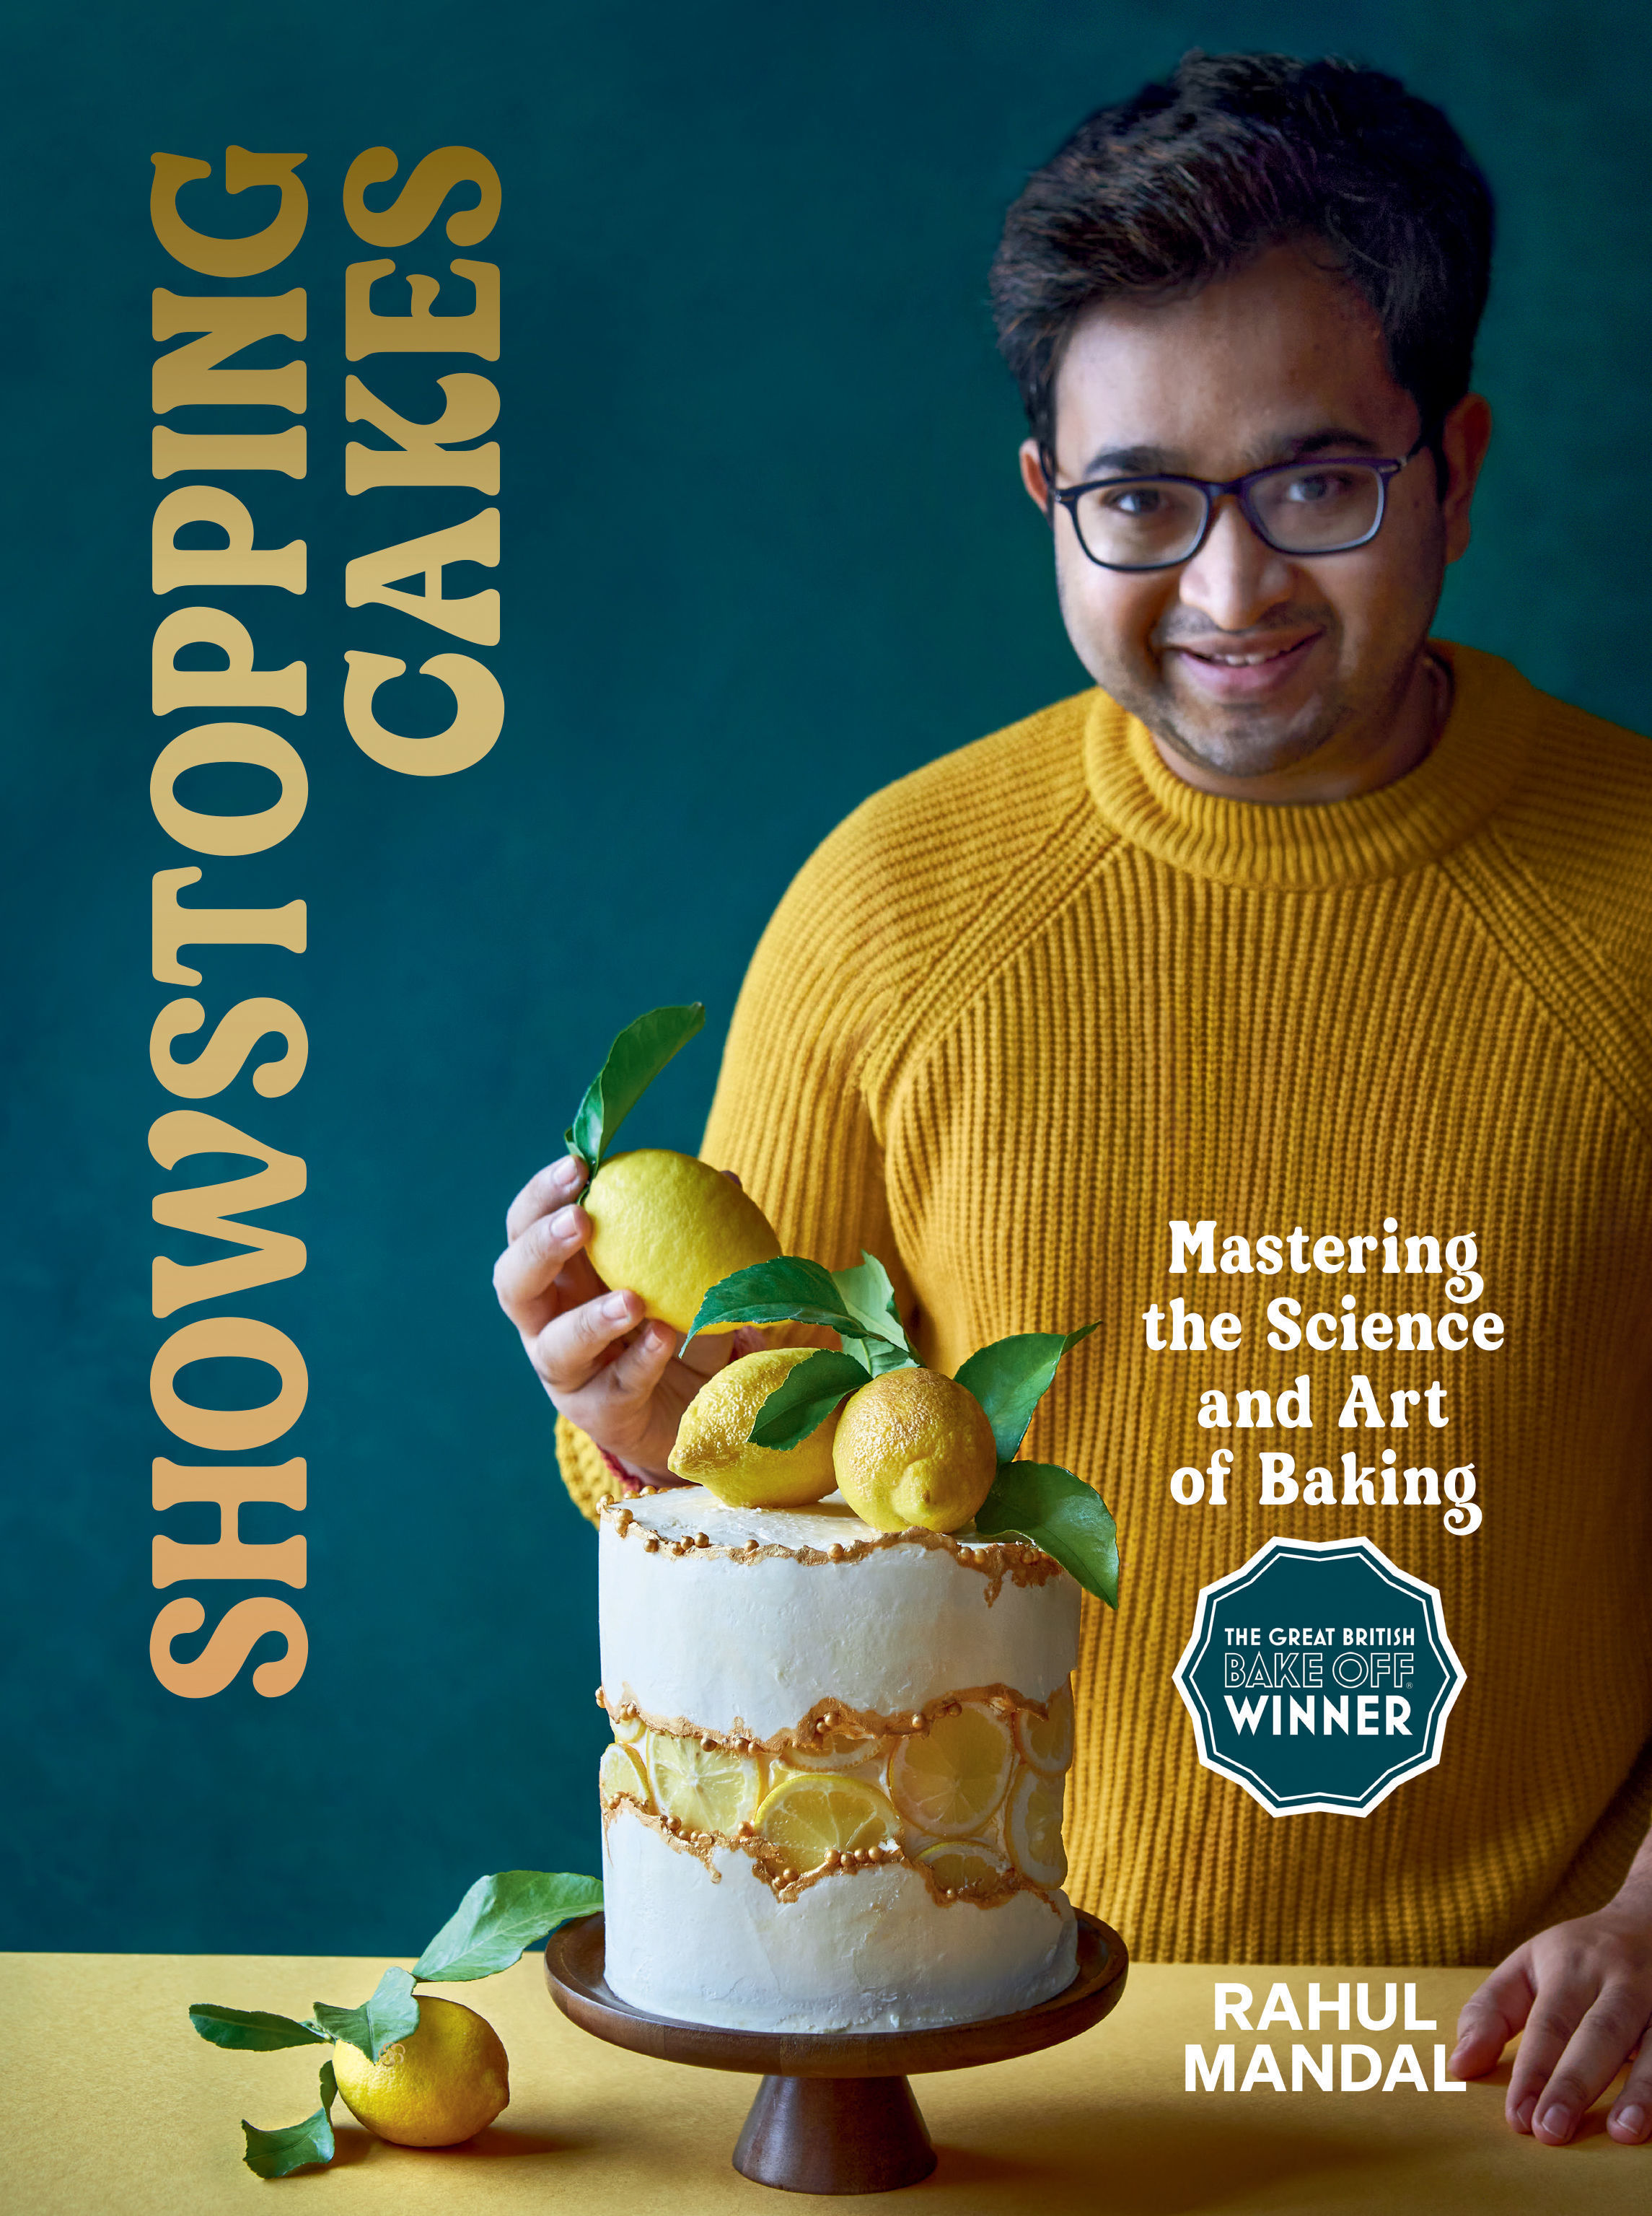 Rahul Mandal on baking to make friends and his fear of Paul Hollywood HeraldScotland